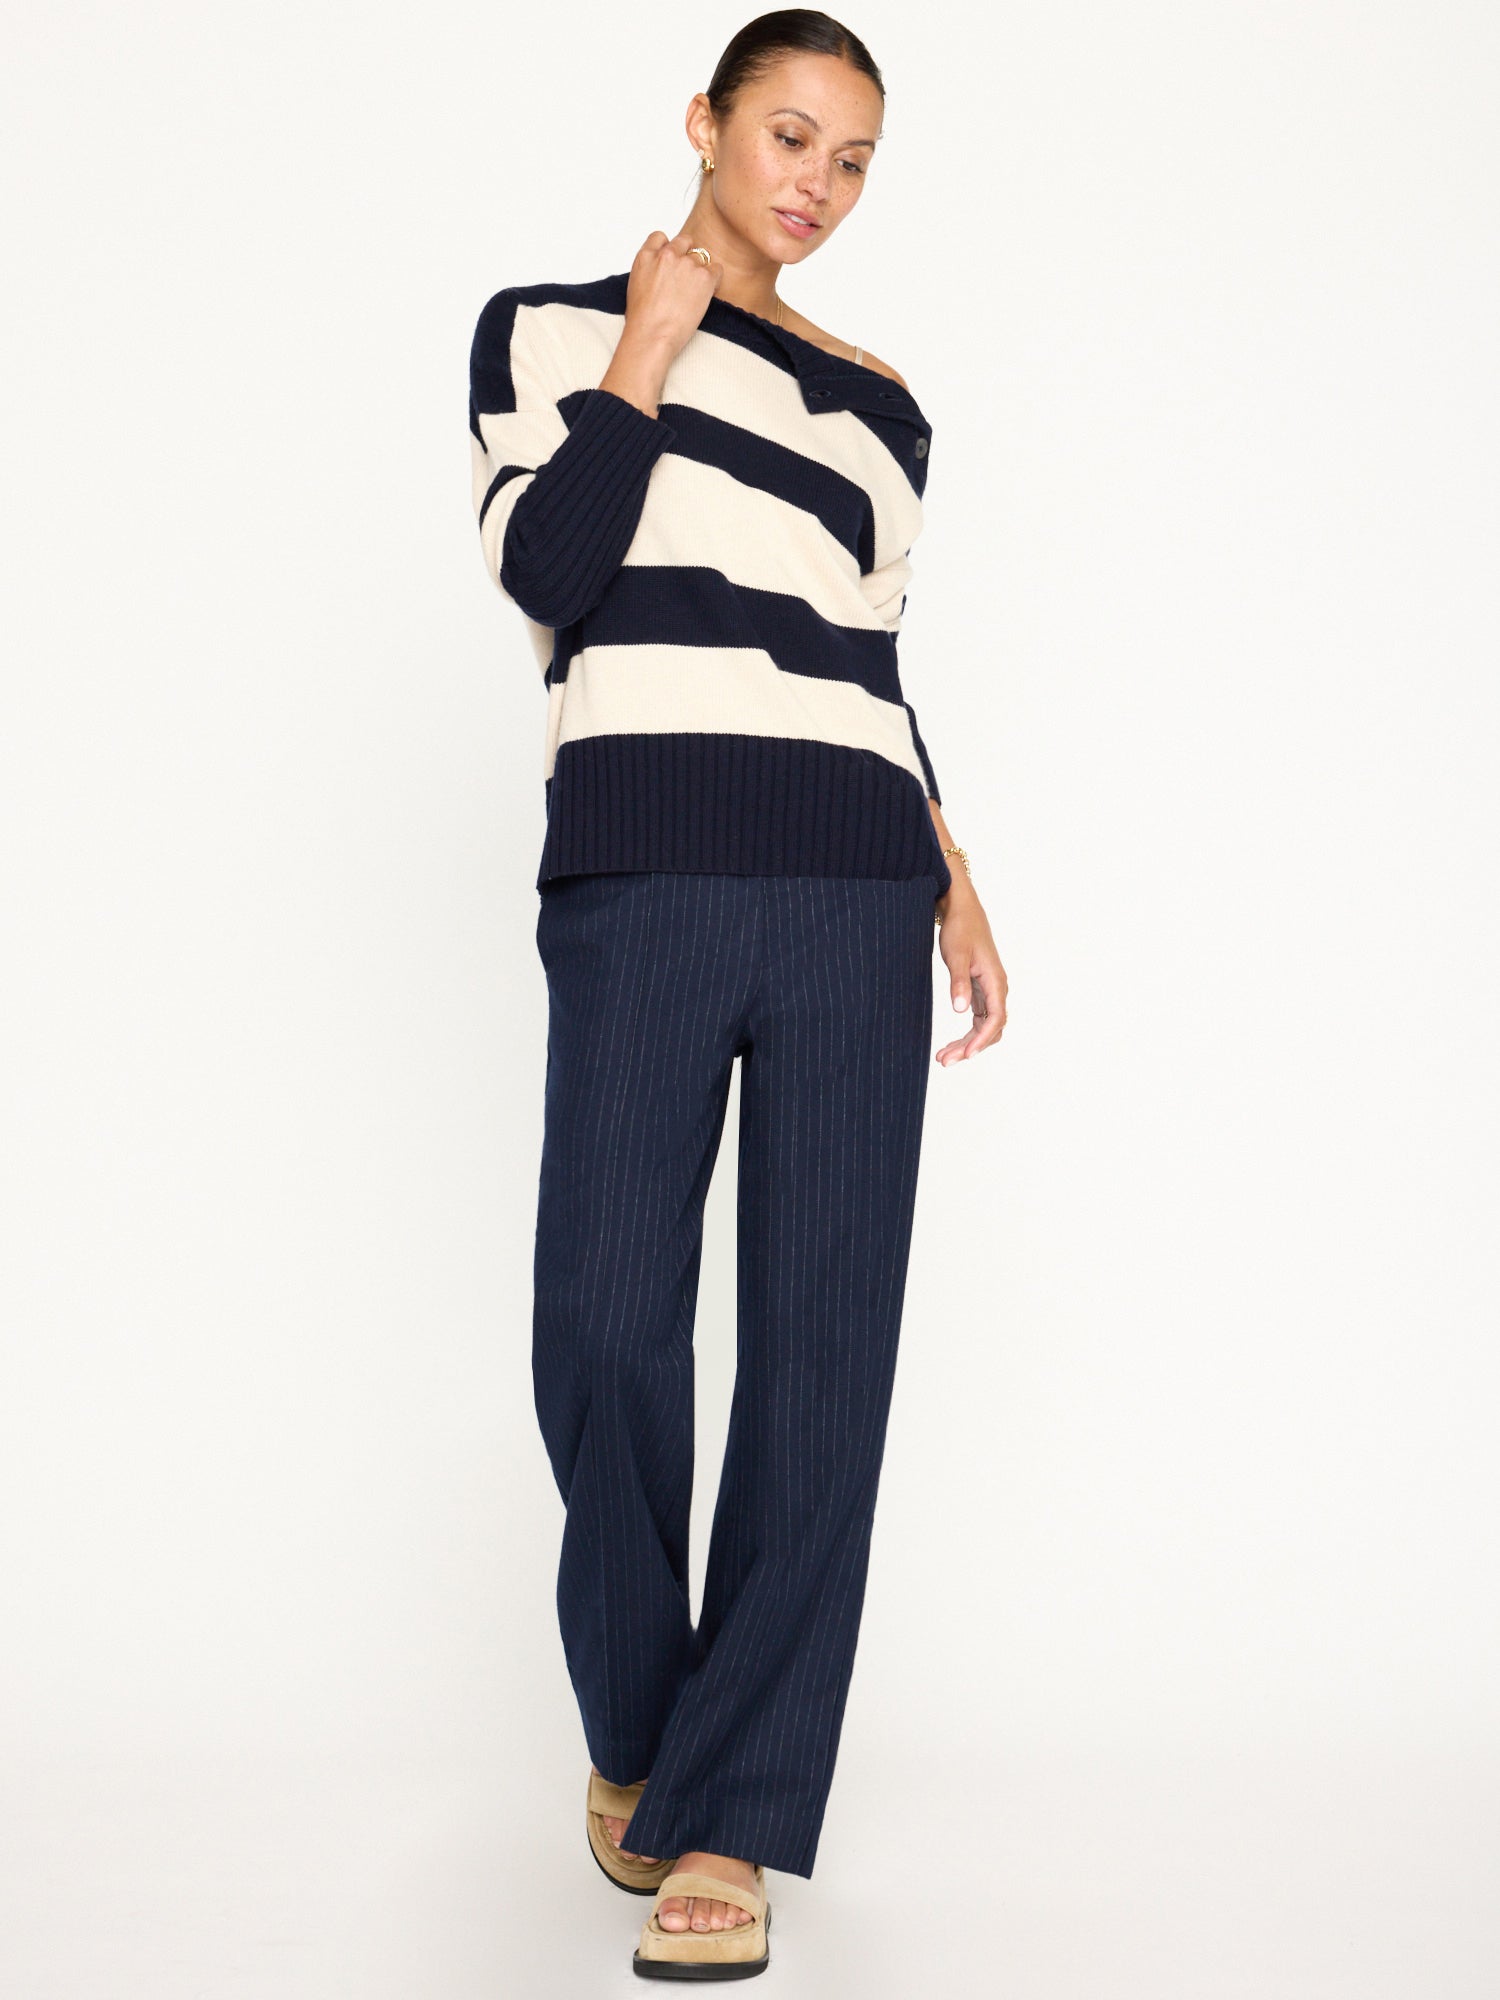 Cy navy and beige stripe crewneck sweater full view 3